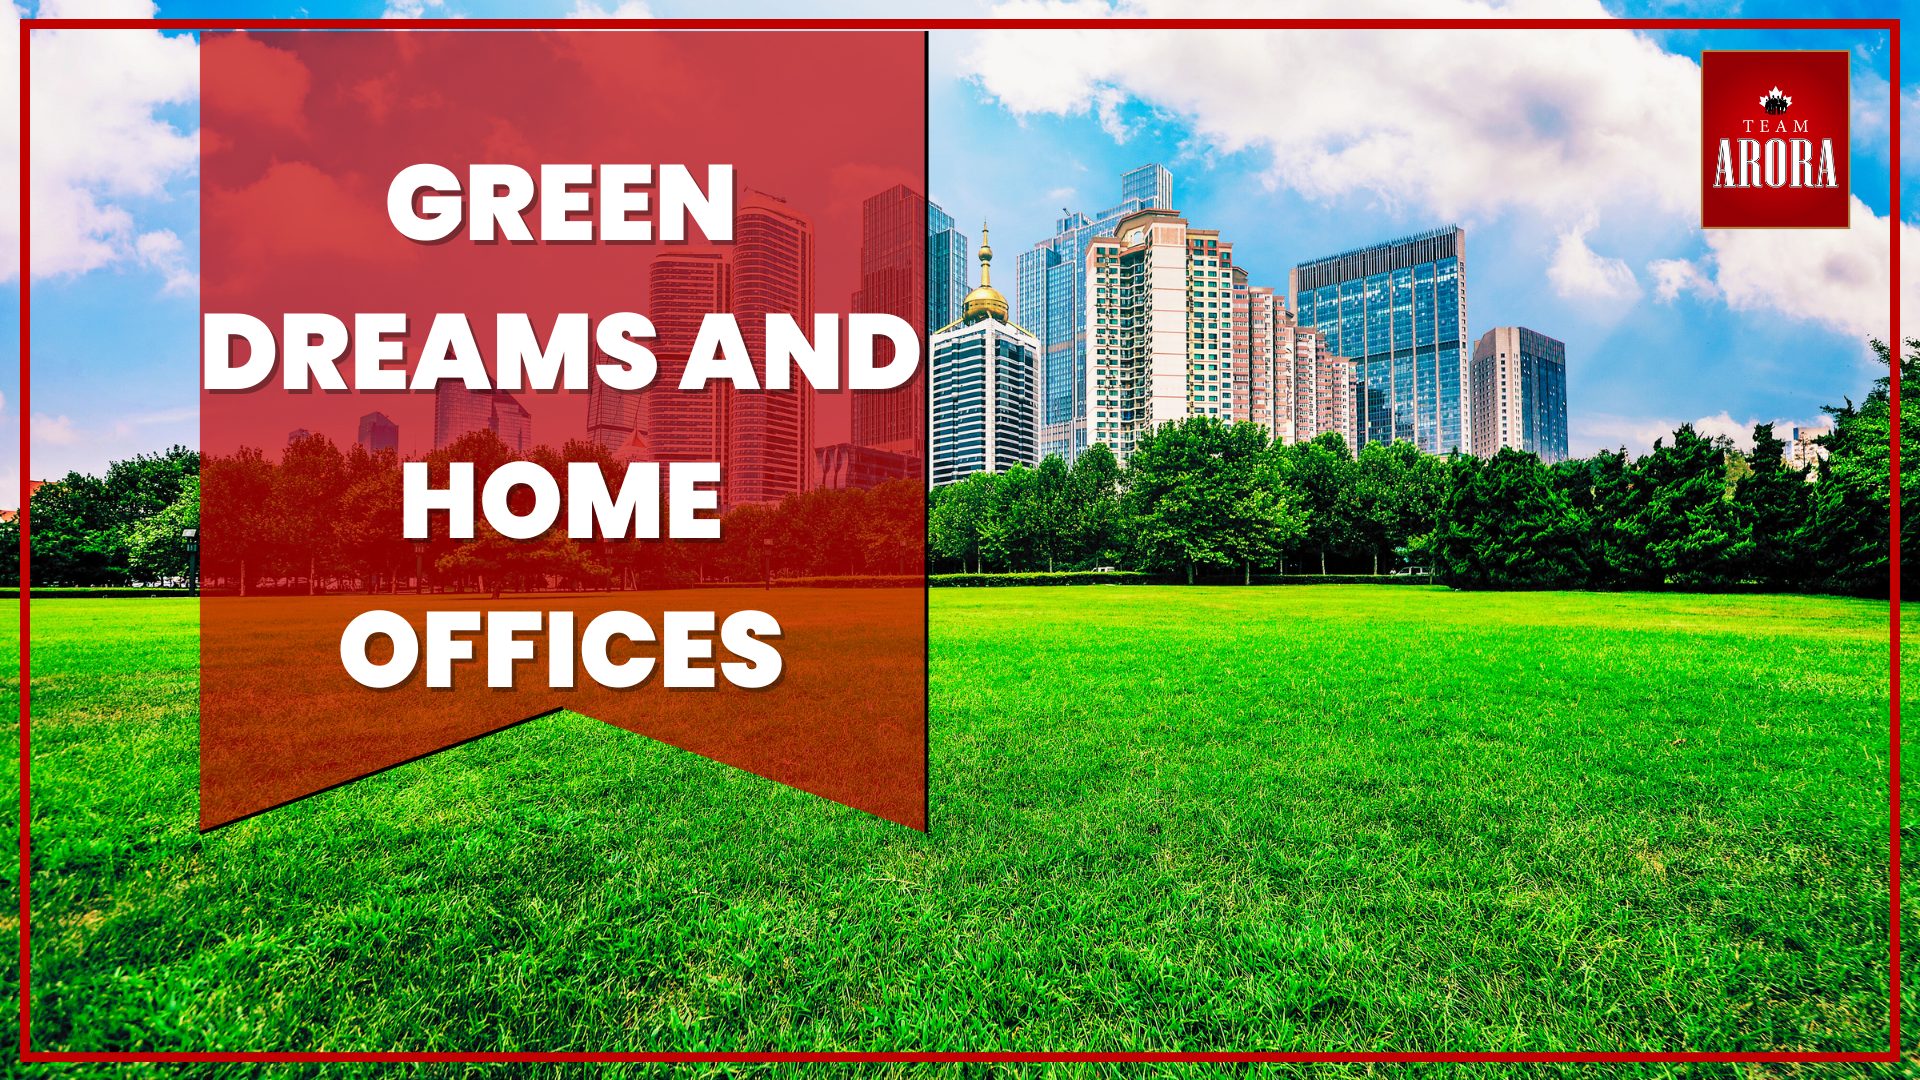 Green Dreams and Home Offices: Top Trends Shaping the Real Estate Market!